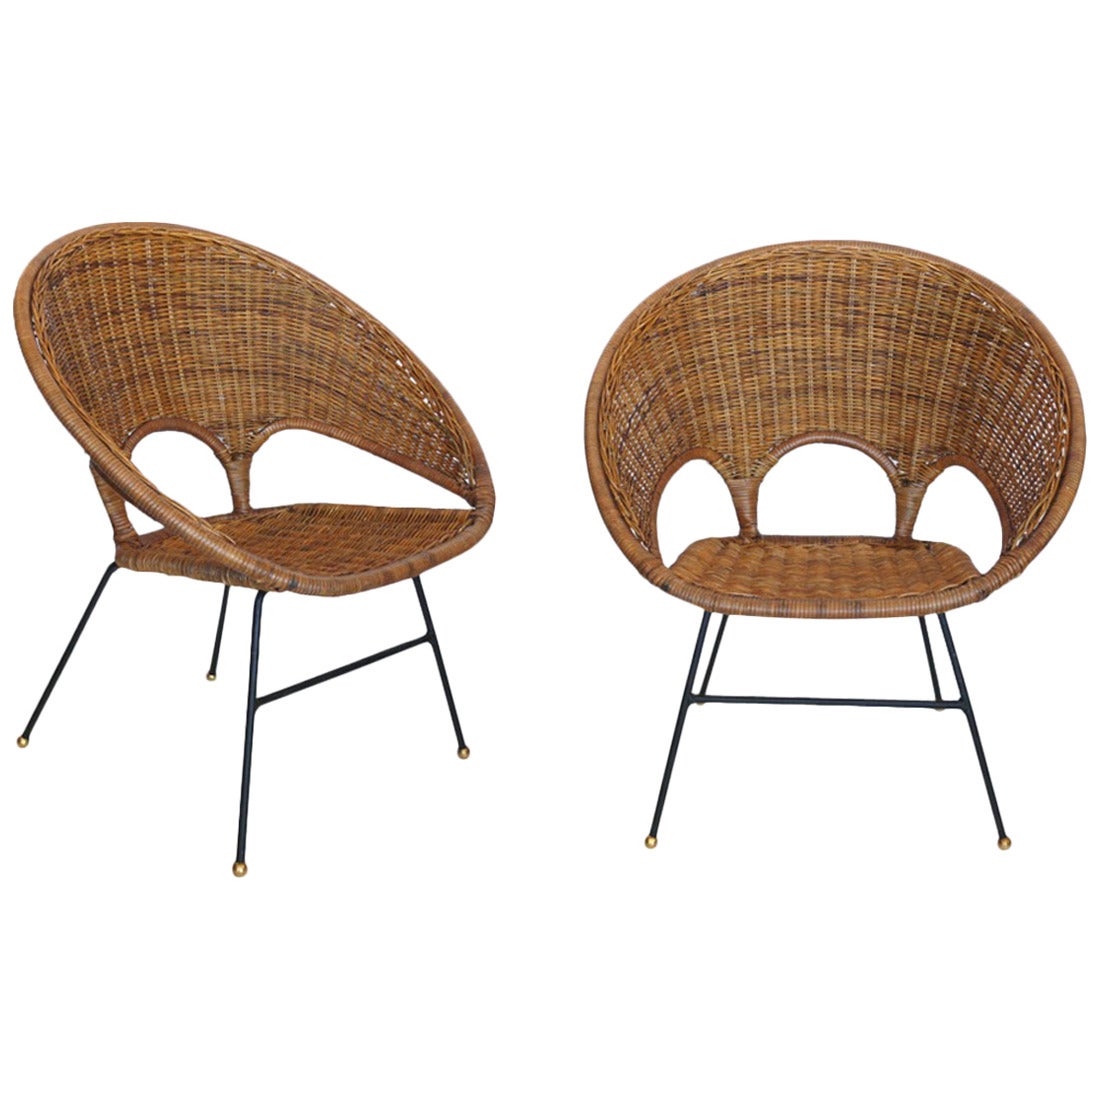 Sculptural Wicker and Rattan Chairs